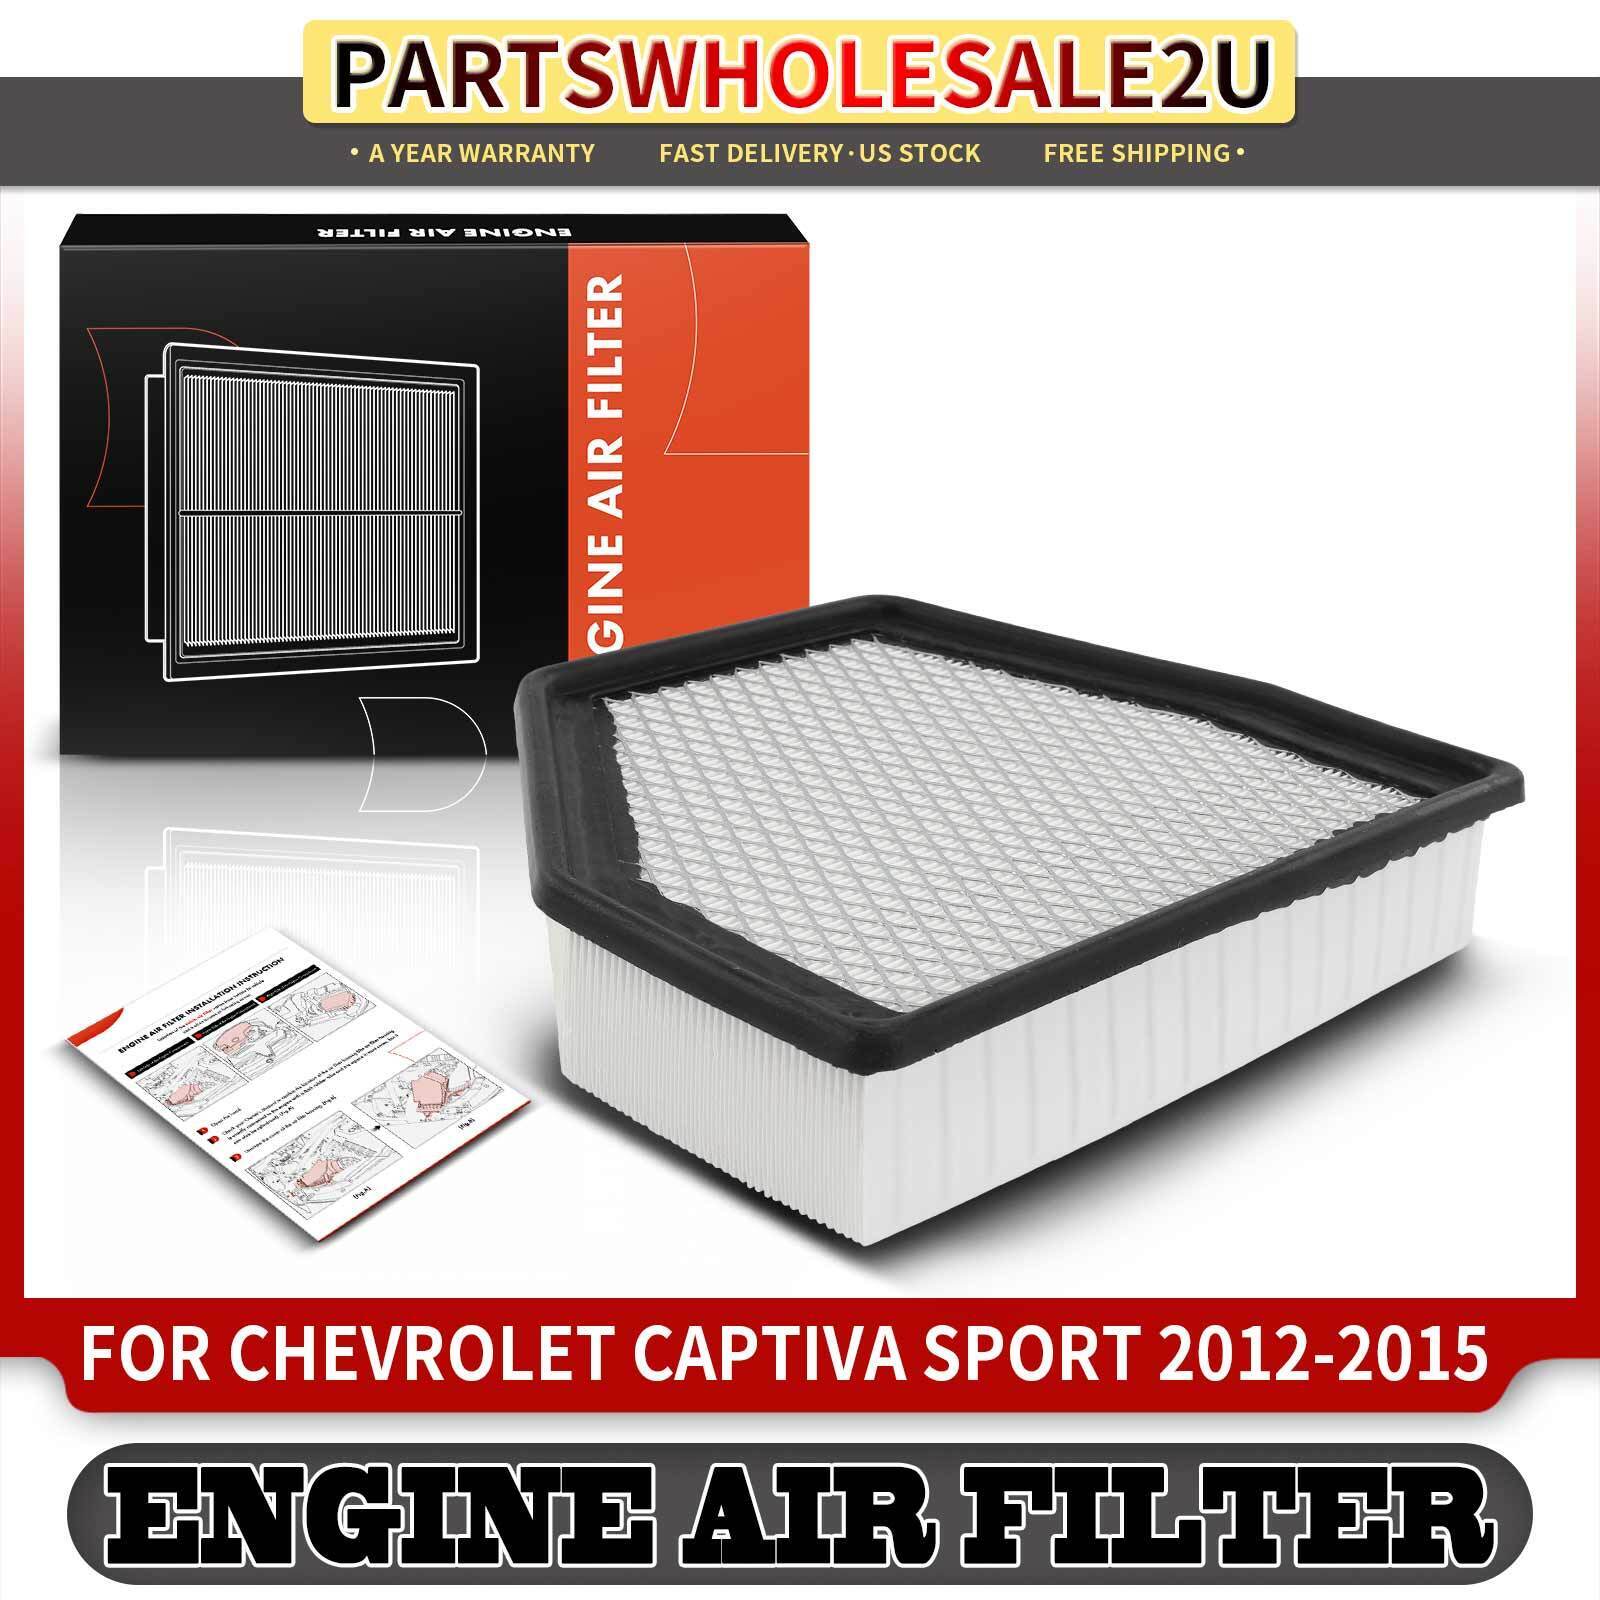 1x Engine Air Filter for Chevy Captiva Sport 12-15 Saturn Vue 2008-2010 96815102